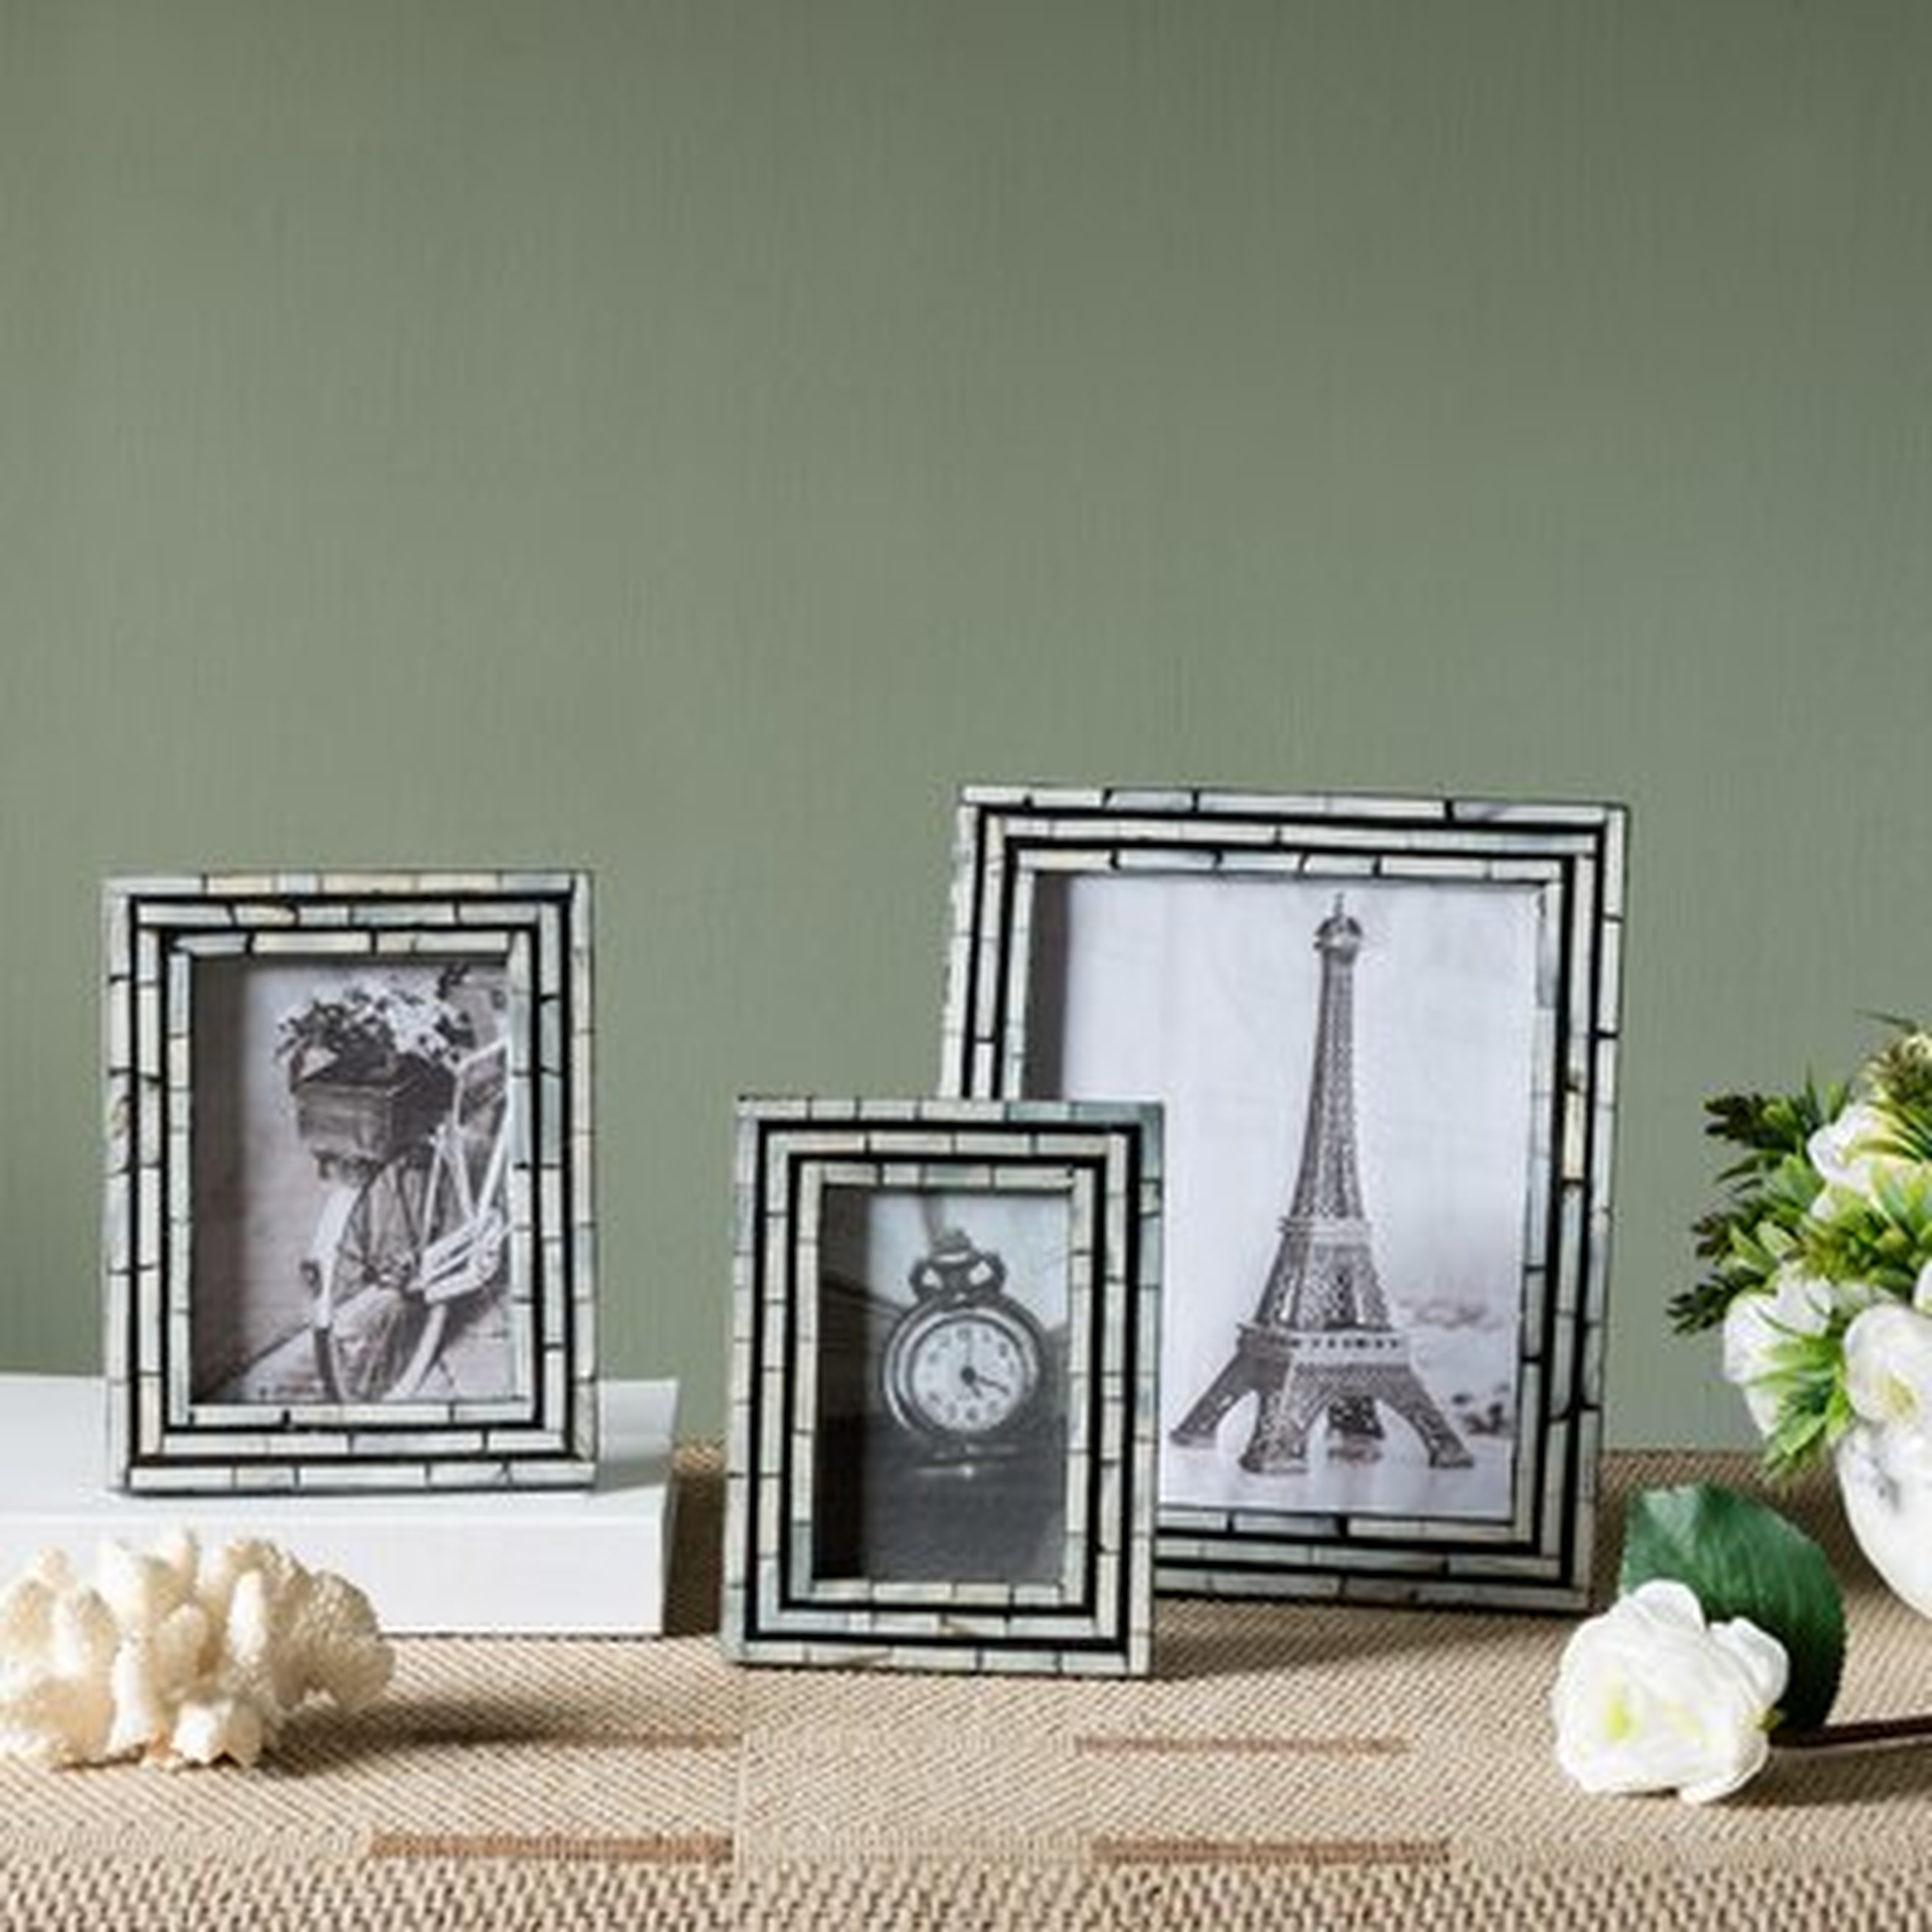 3 Piece Parise Mother of Pearl Picture Frame Set - Birch Lane